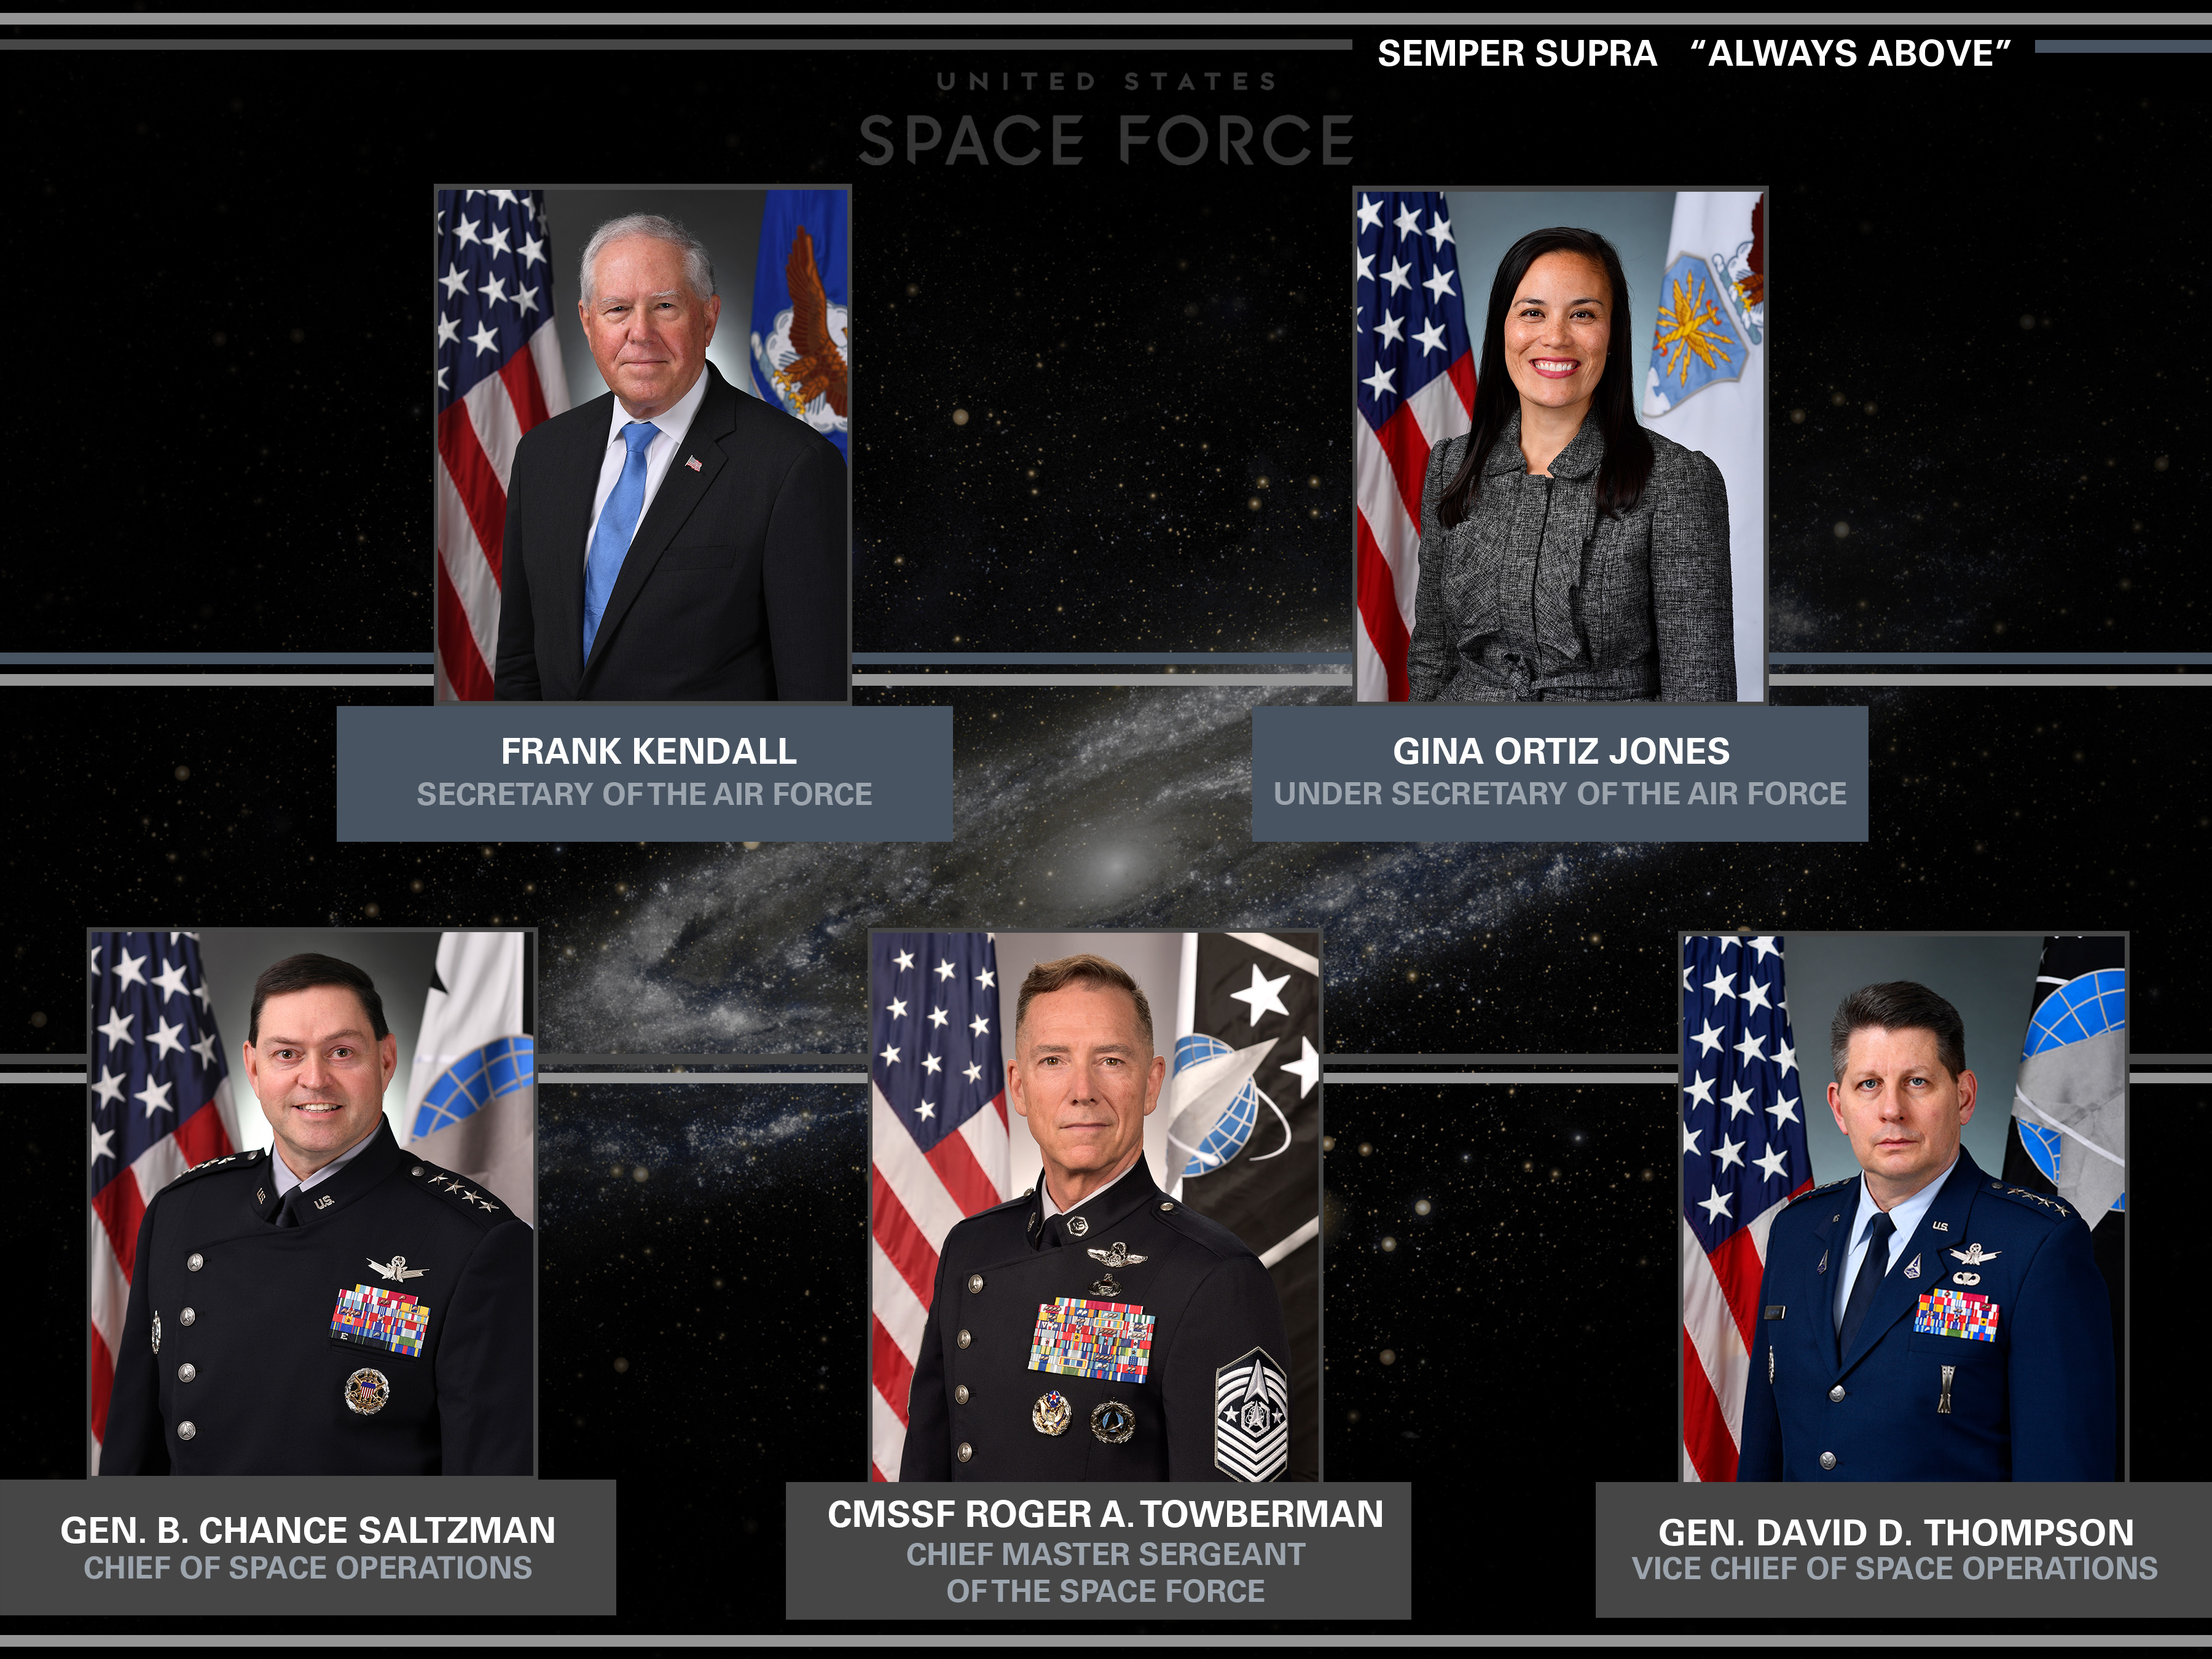 A graphic depicting the top three Space Force military leaders and emblem of Office of the Secretary, US Air Force